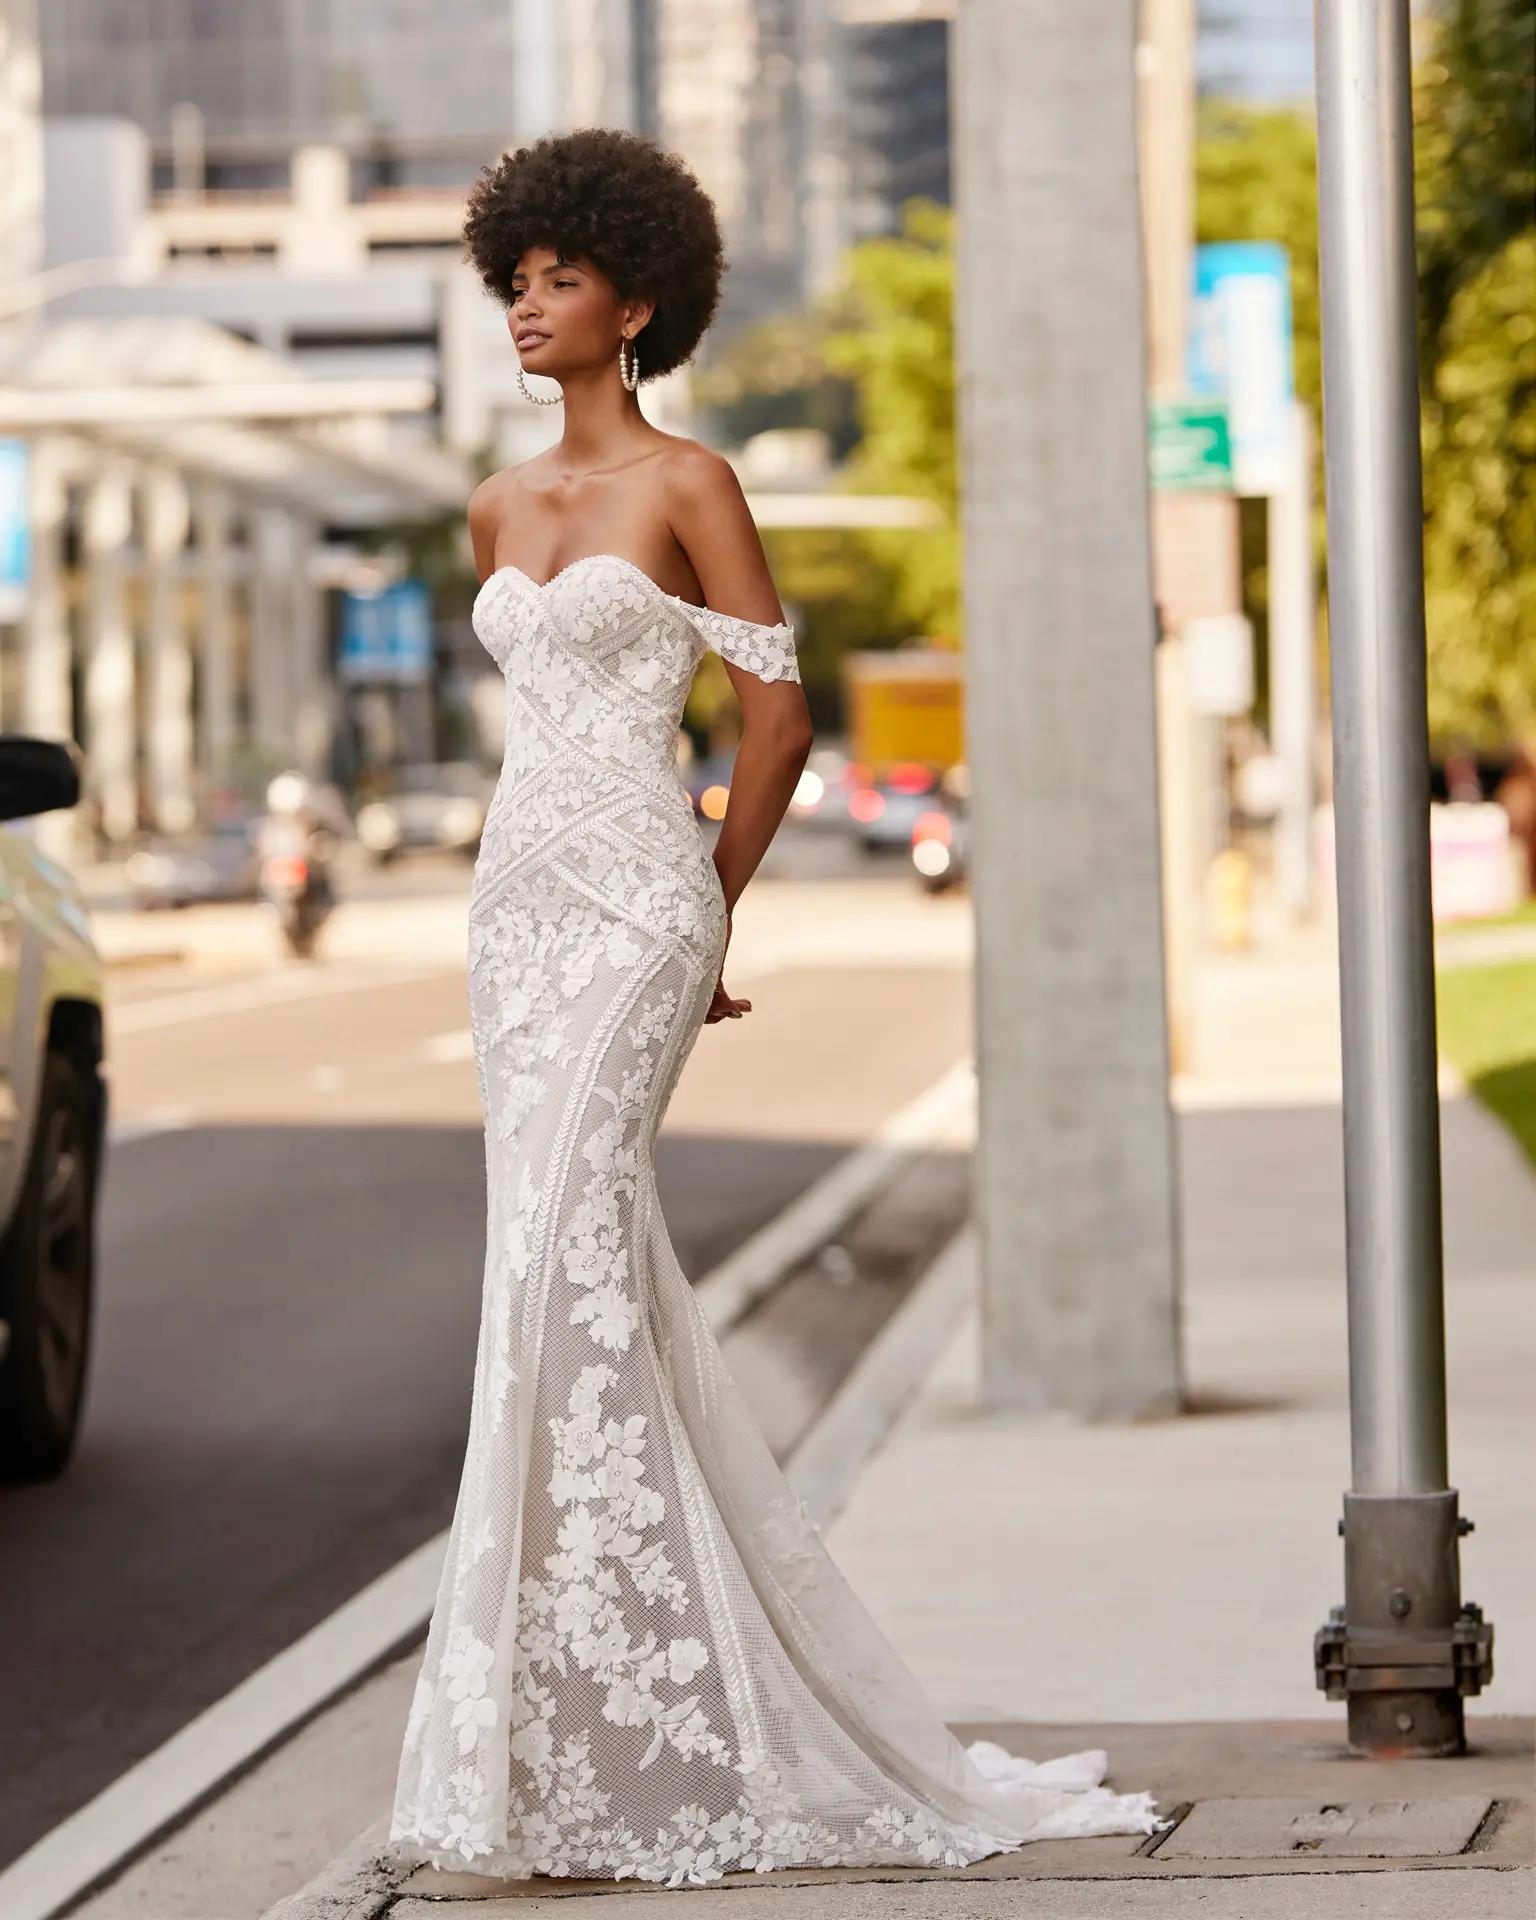 Kya wedding dress by Rosa Clara in Columbus Ohio with sweetheart neckline, detailed lace, and off the shoulder straps on a fitted silhouette